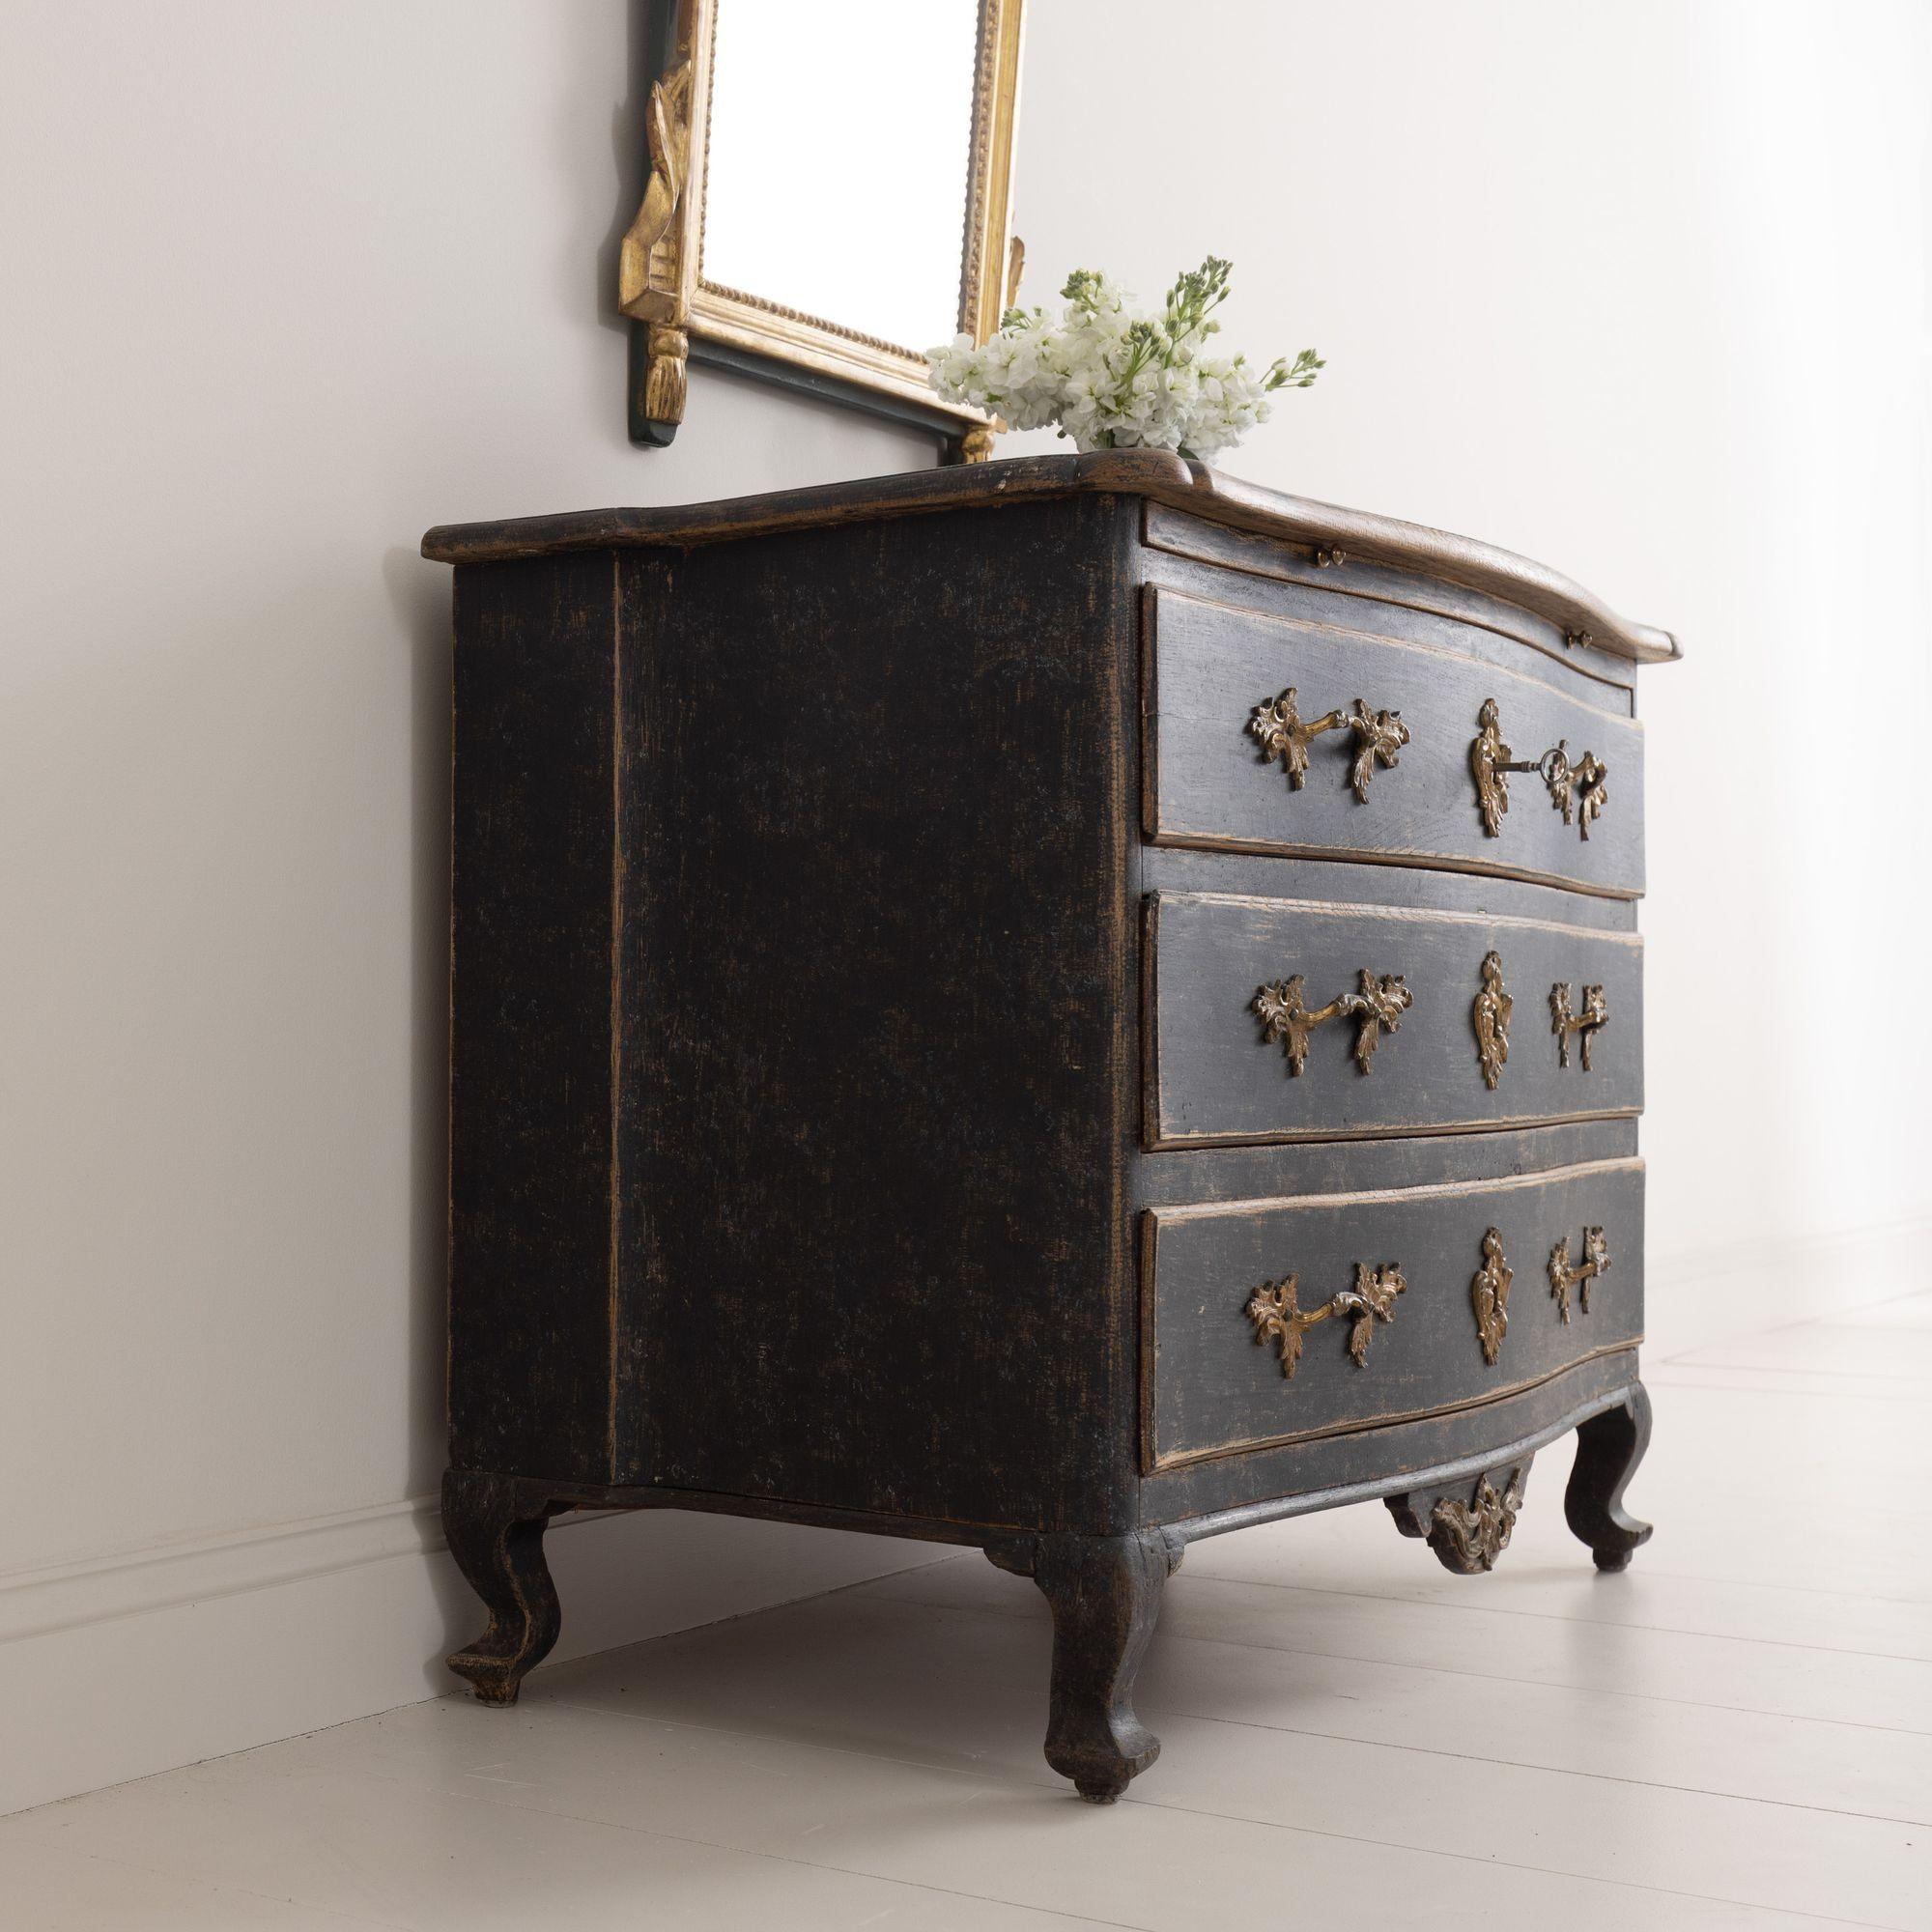 18th C. Swedish Rococo Period Black Painted Commode with Original Brass Hardware For Sale 6